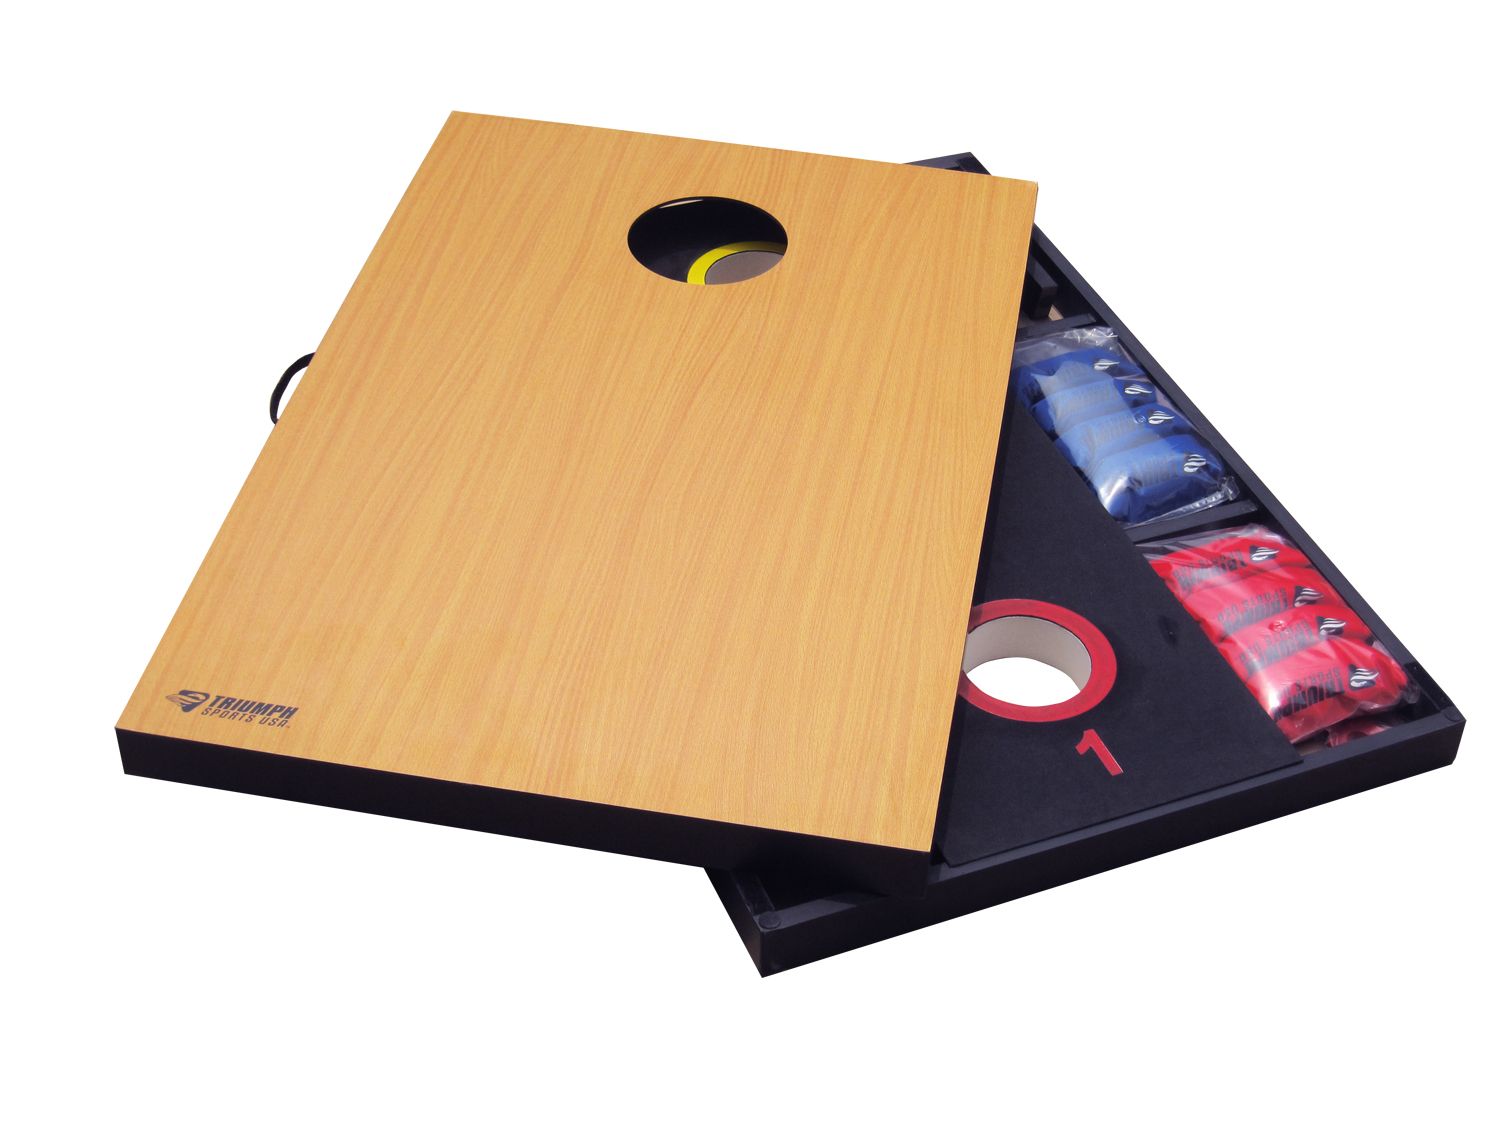 Triumph Sports 2-in-1 Bag Toss Tournament Game and 3-Hole Washer Toss